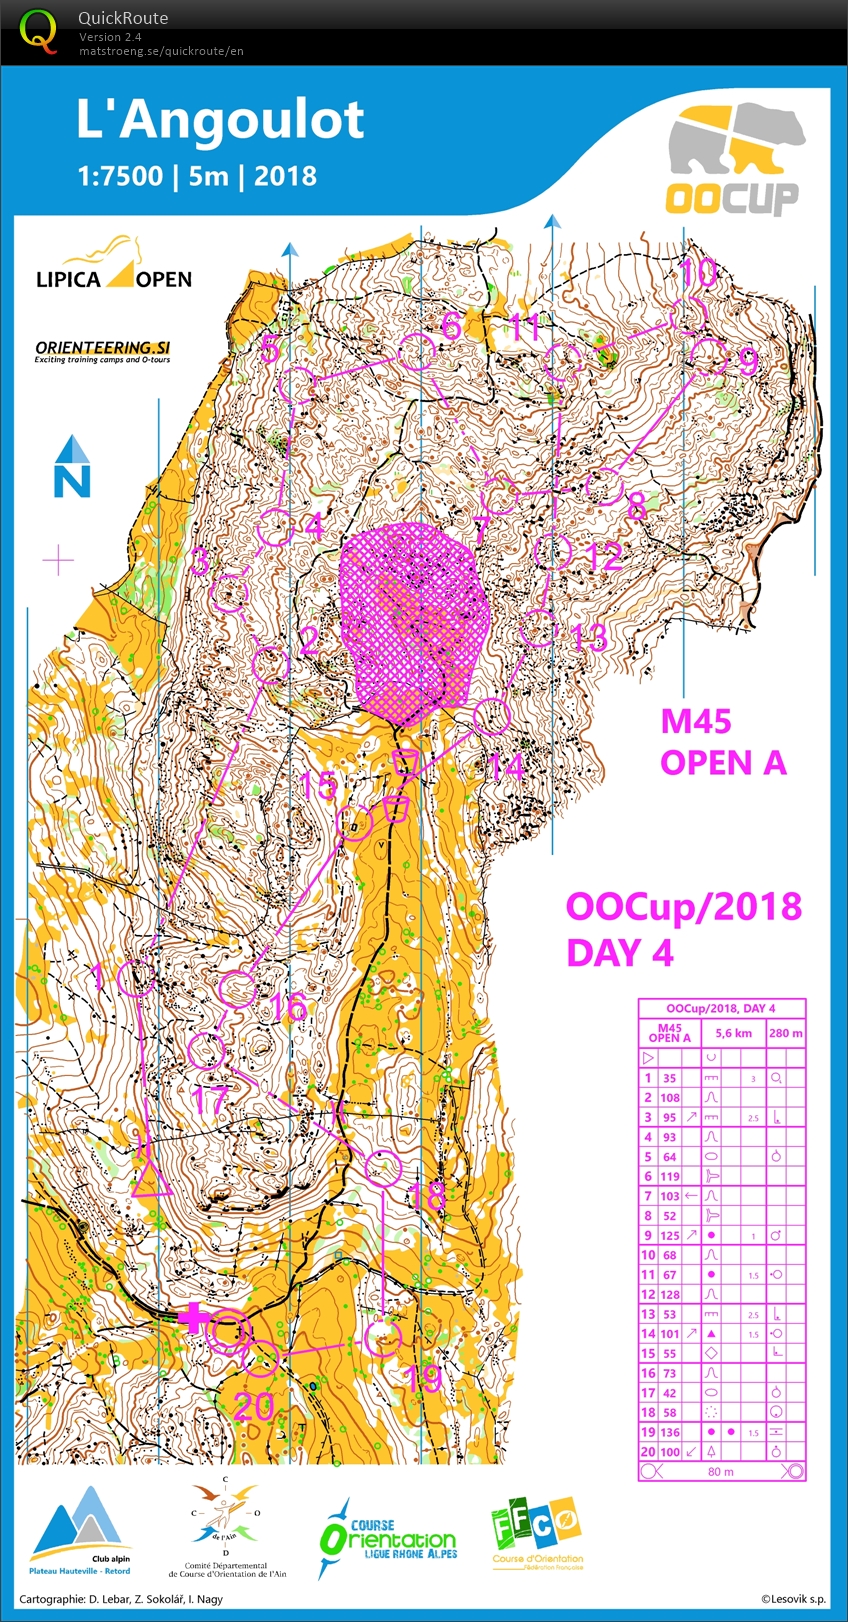 OOCup Day 4 (28/07/2018)